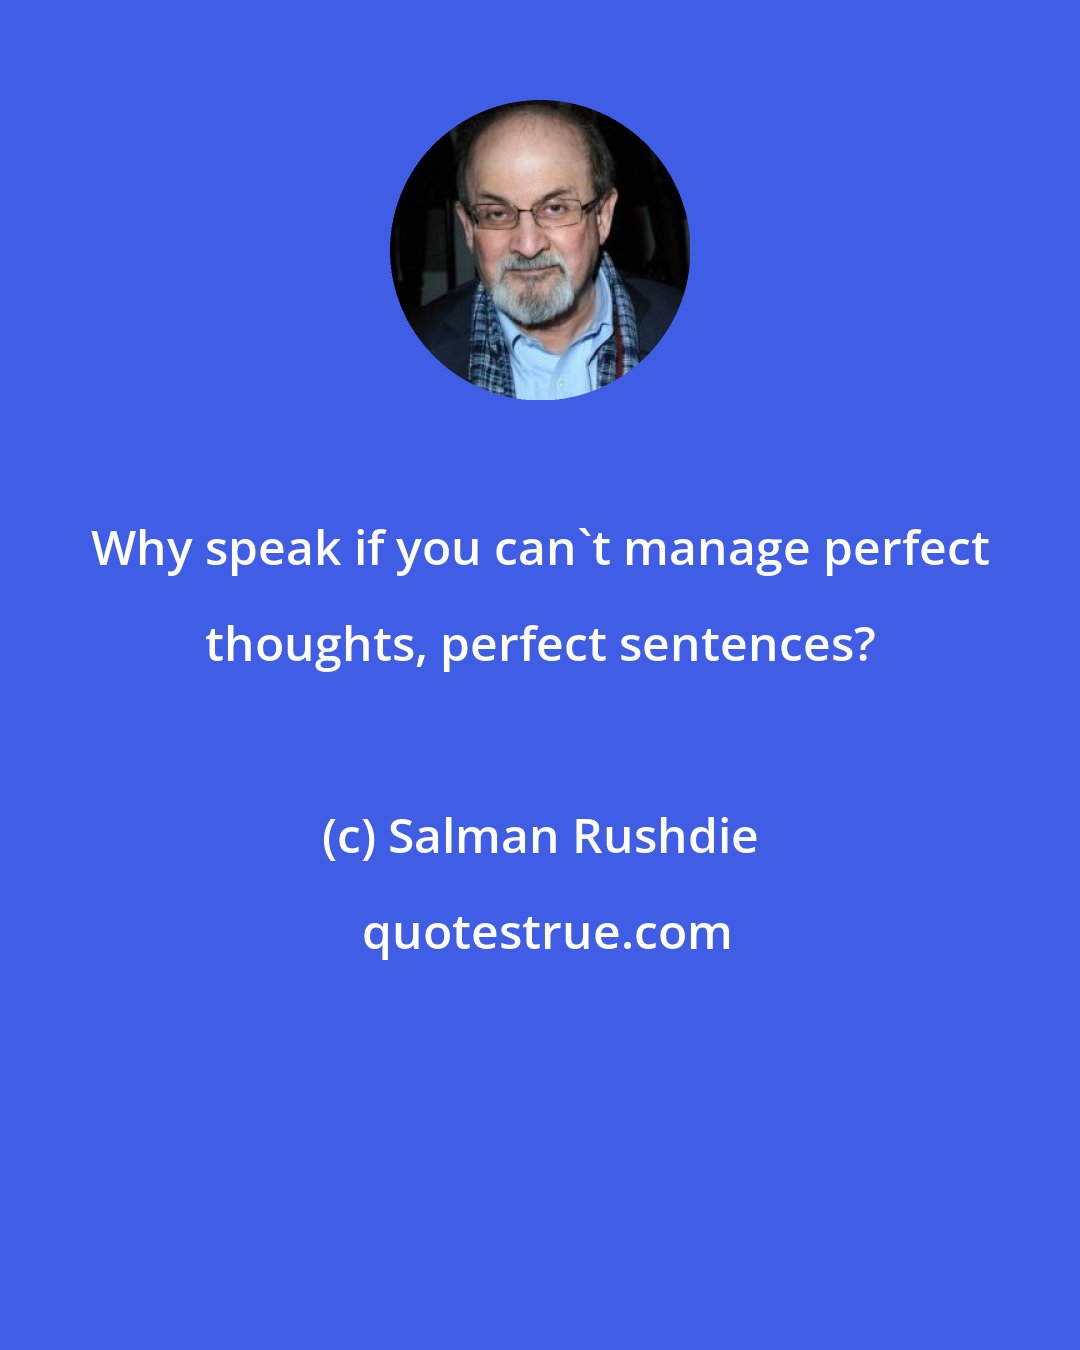 Salman Rushdie: Why speak if you can't manage perfect thoughts, perfect sentences?